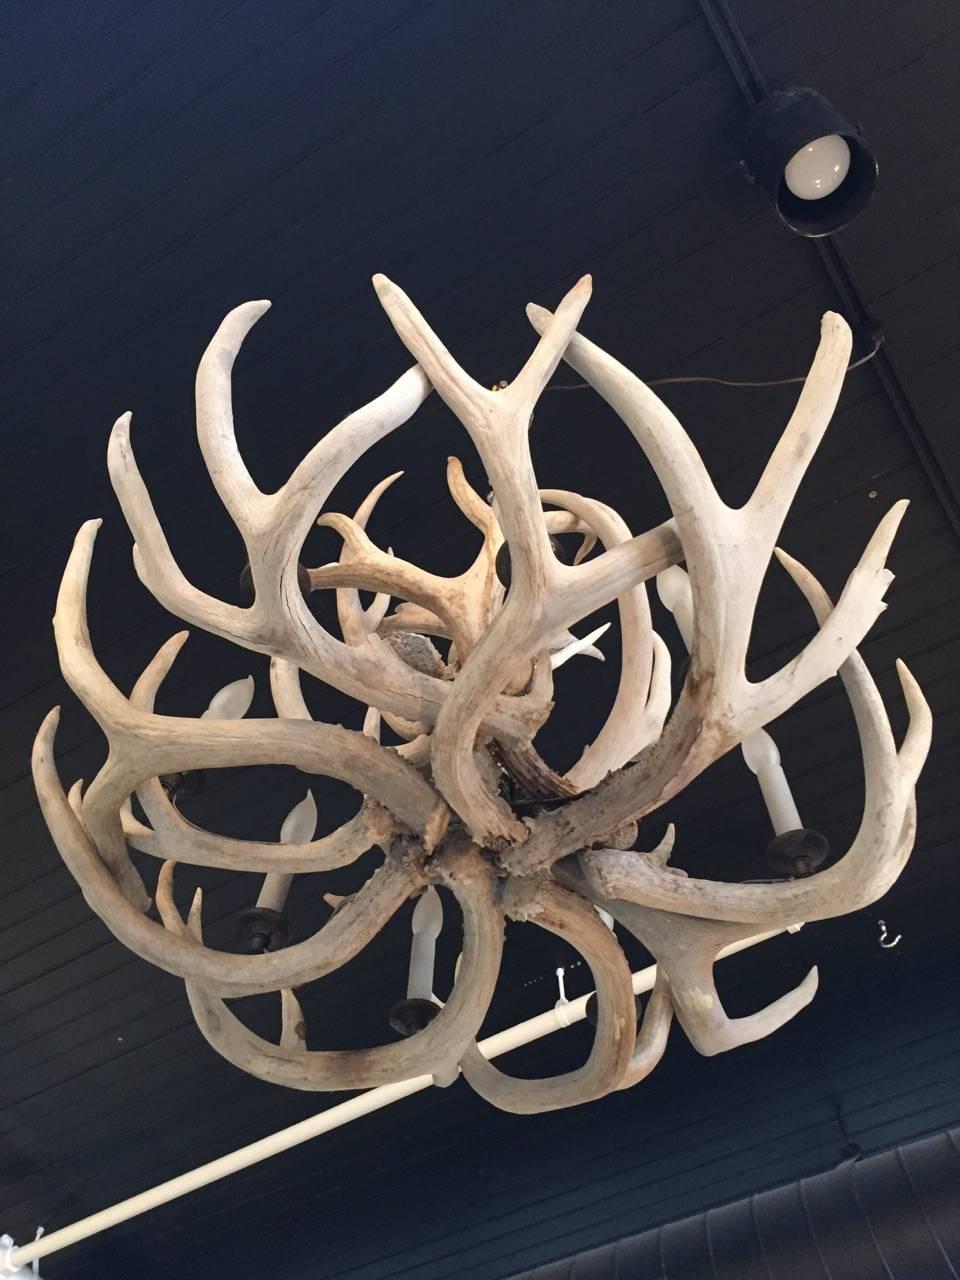 Rare in its fullness and craftsmanship, a large genuine antler chandelier having eight lights and a bleached natural patina. 40-60 watt bulbs. Magnificent!